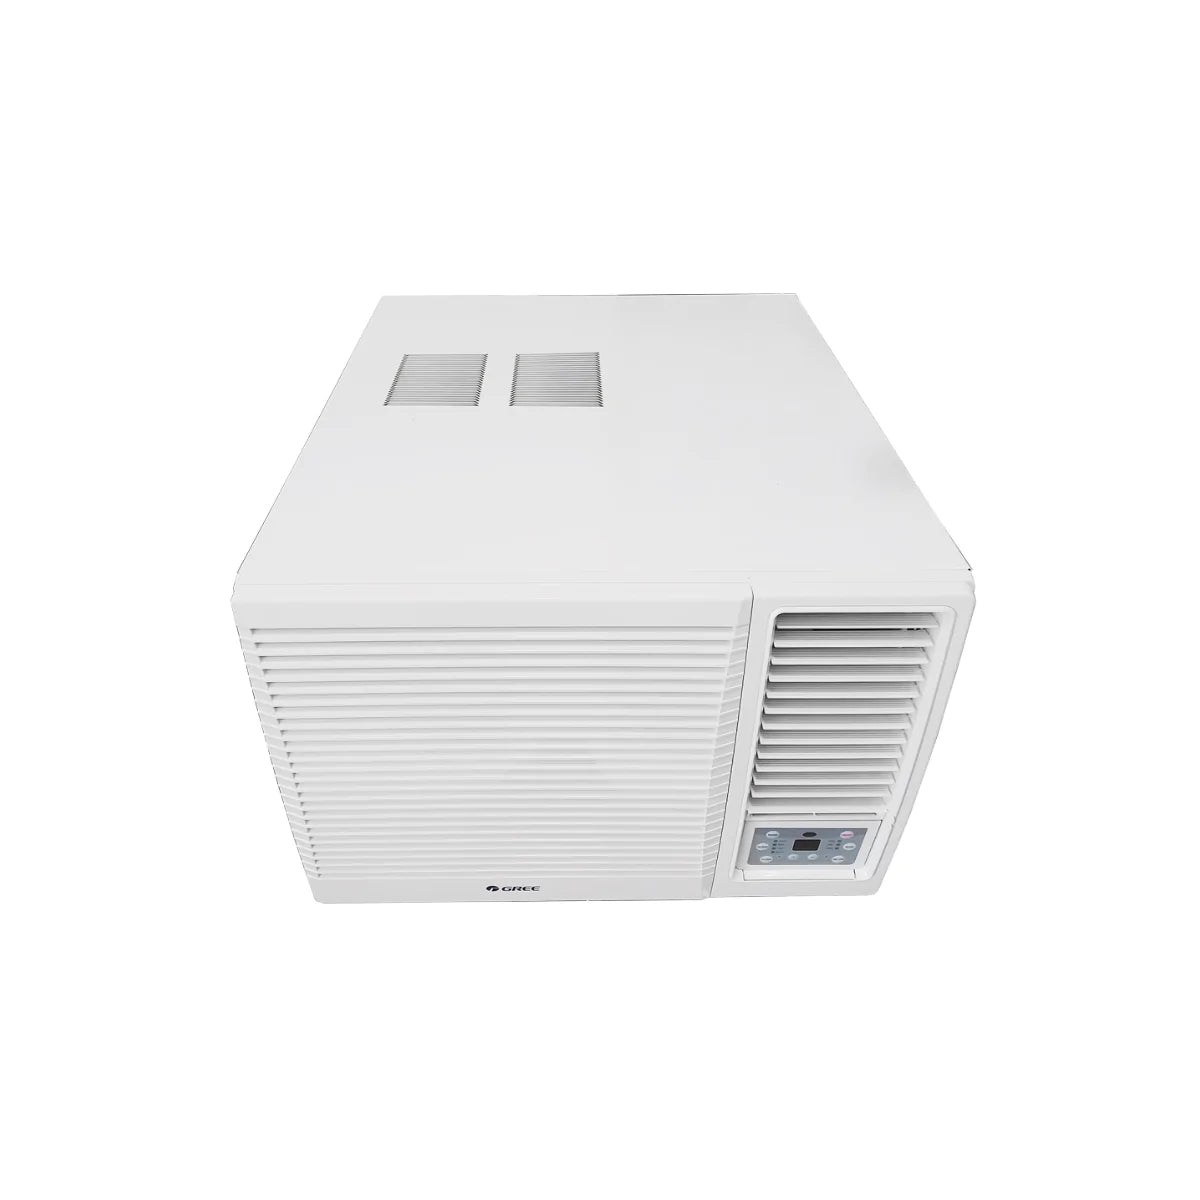 Gree 1.0 HP Window Type Airconditioner / Remote Controlled | JN Ventures